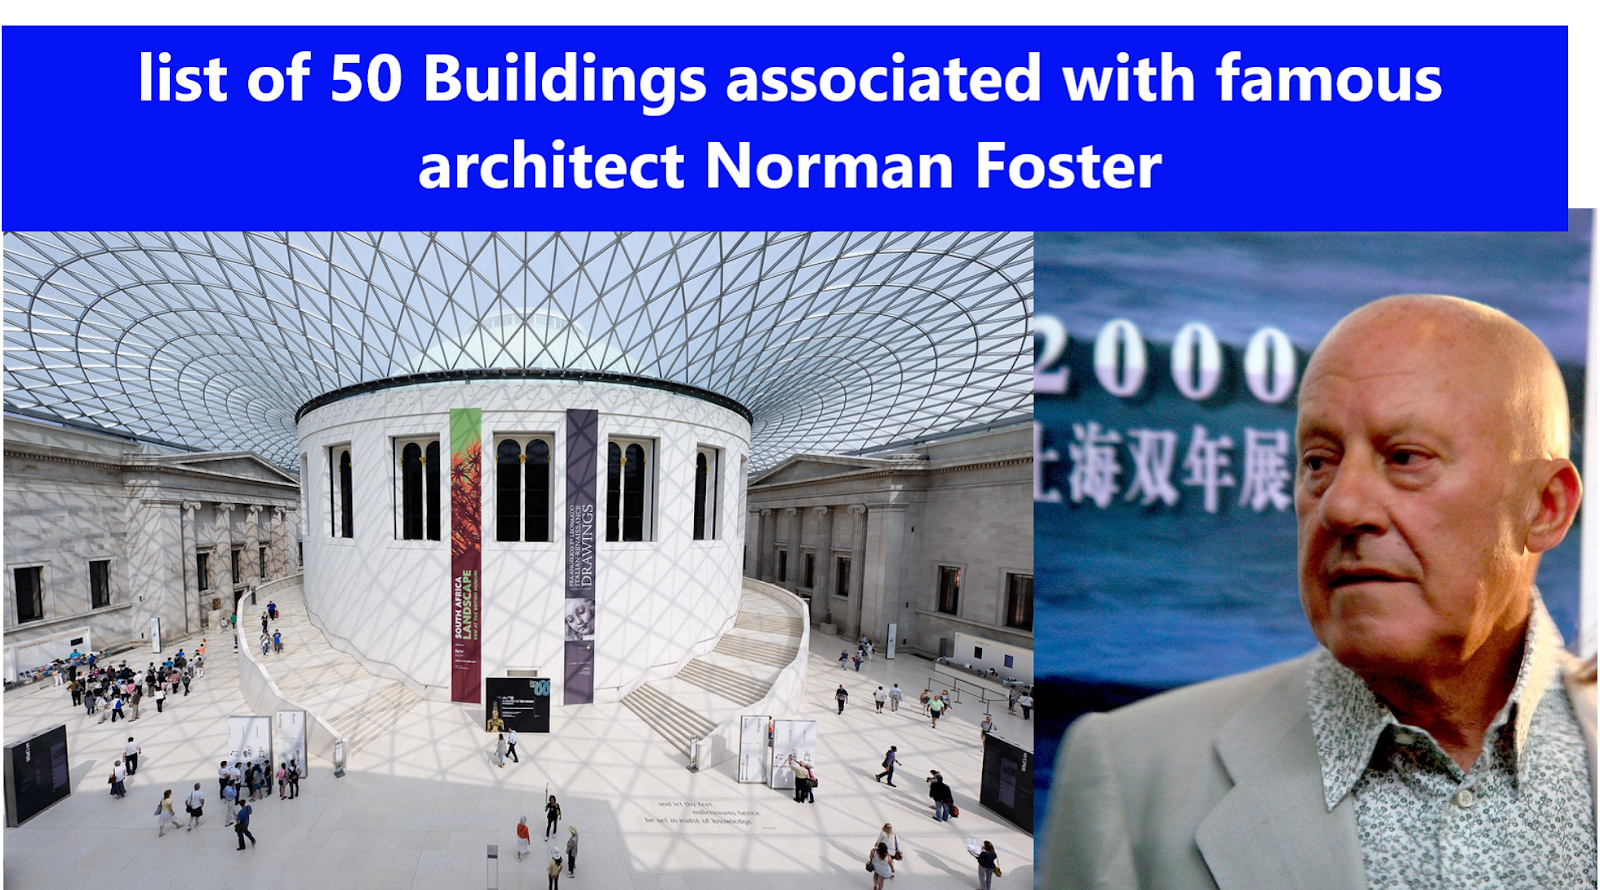 list of 50 Buildings associated with famous architect Norman Foster